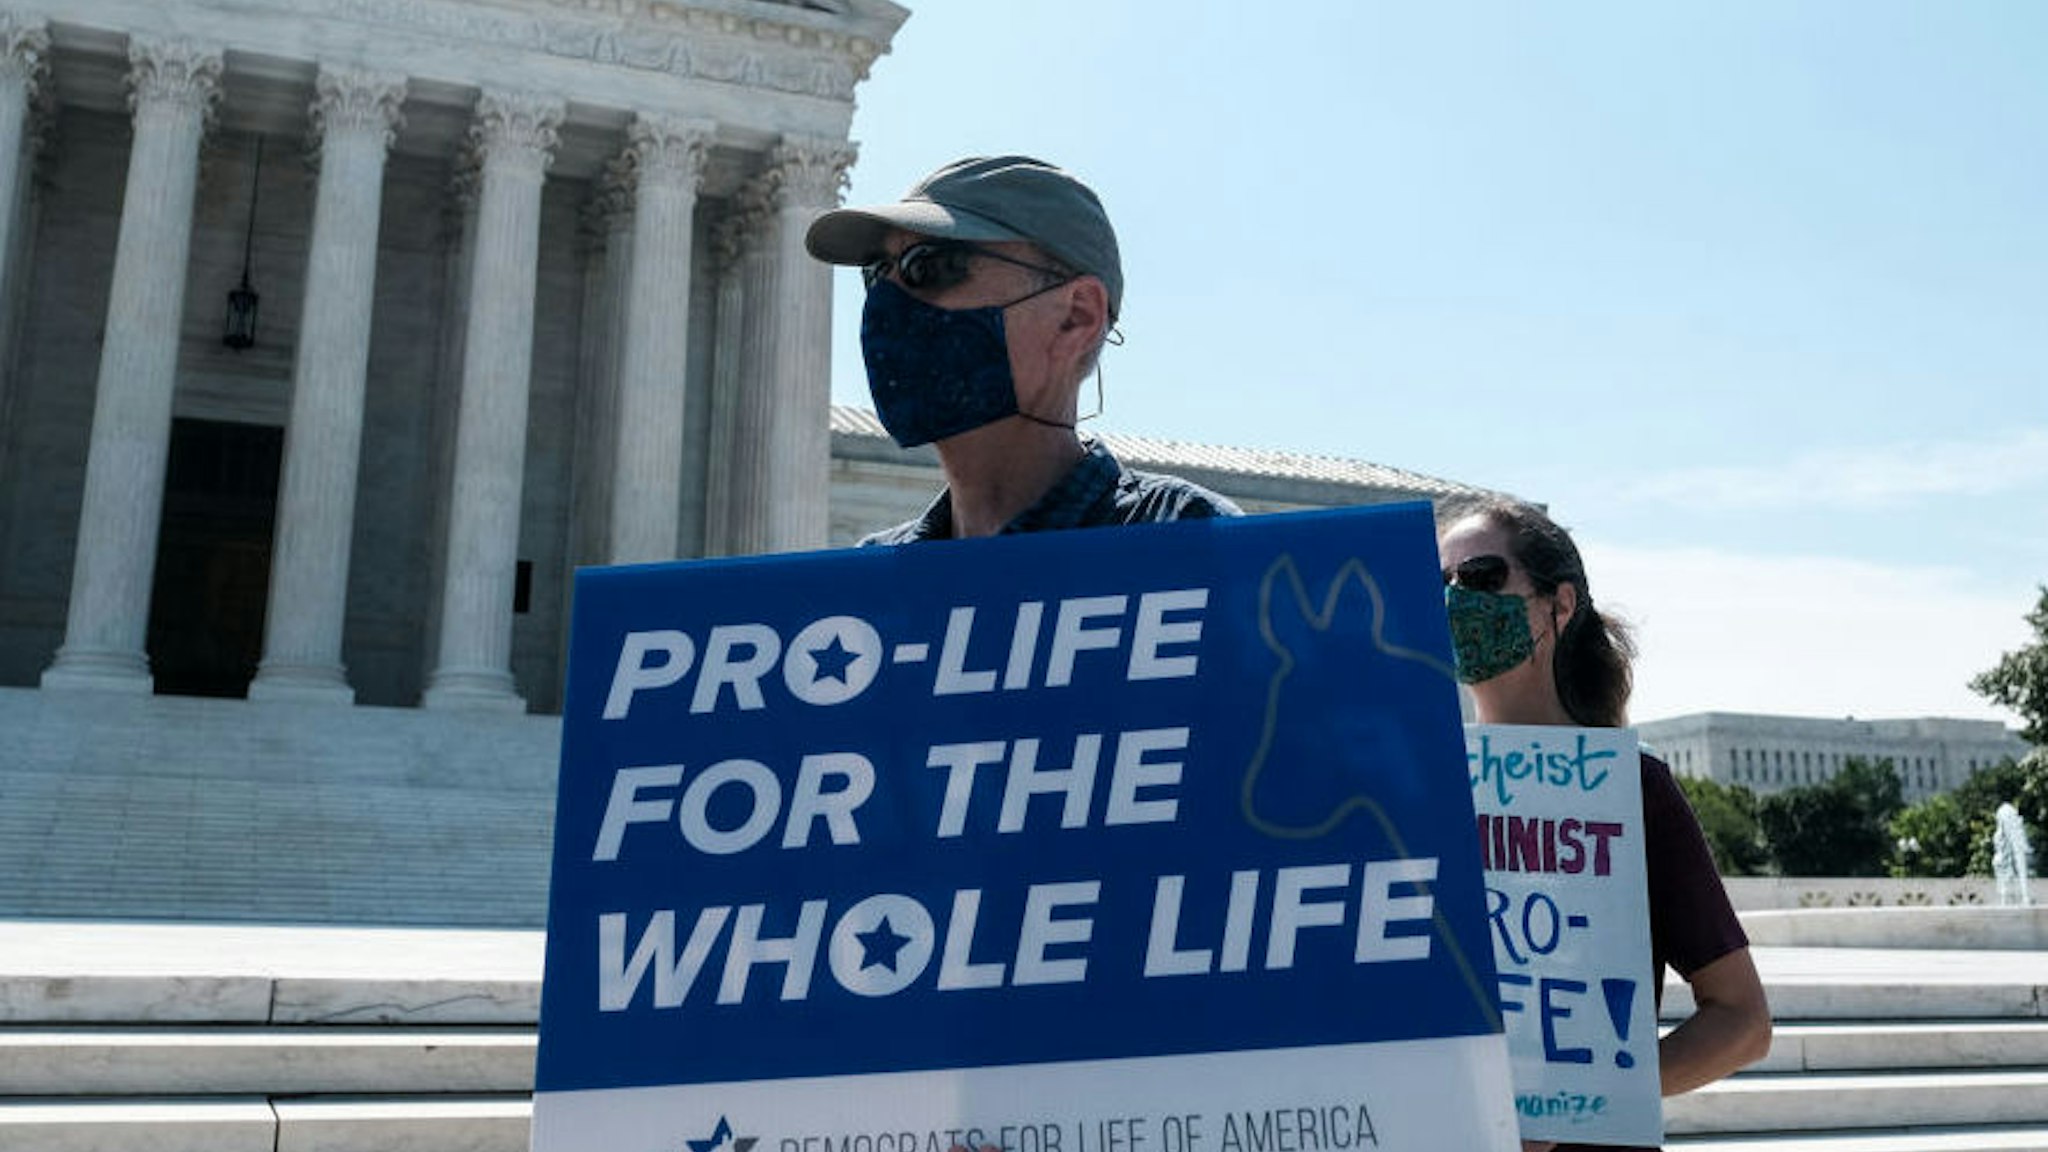 WASHINGTON, DC - JUNE 25: Pro-life activists stage a protest in front of the U.S. Supreme Court June 25, 2020 in Washington, DC. The Supreme Court is expected to issue a ruling on abortion rights soon. (Photo by Michael A. McCoy/Getty Images)